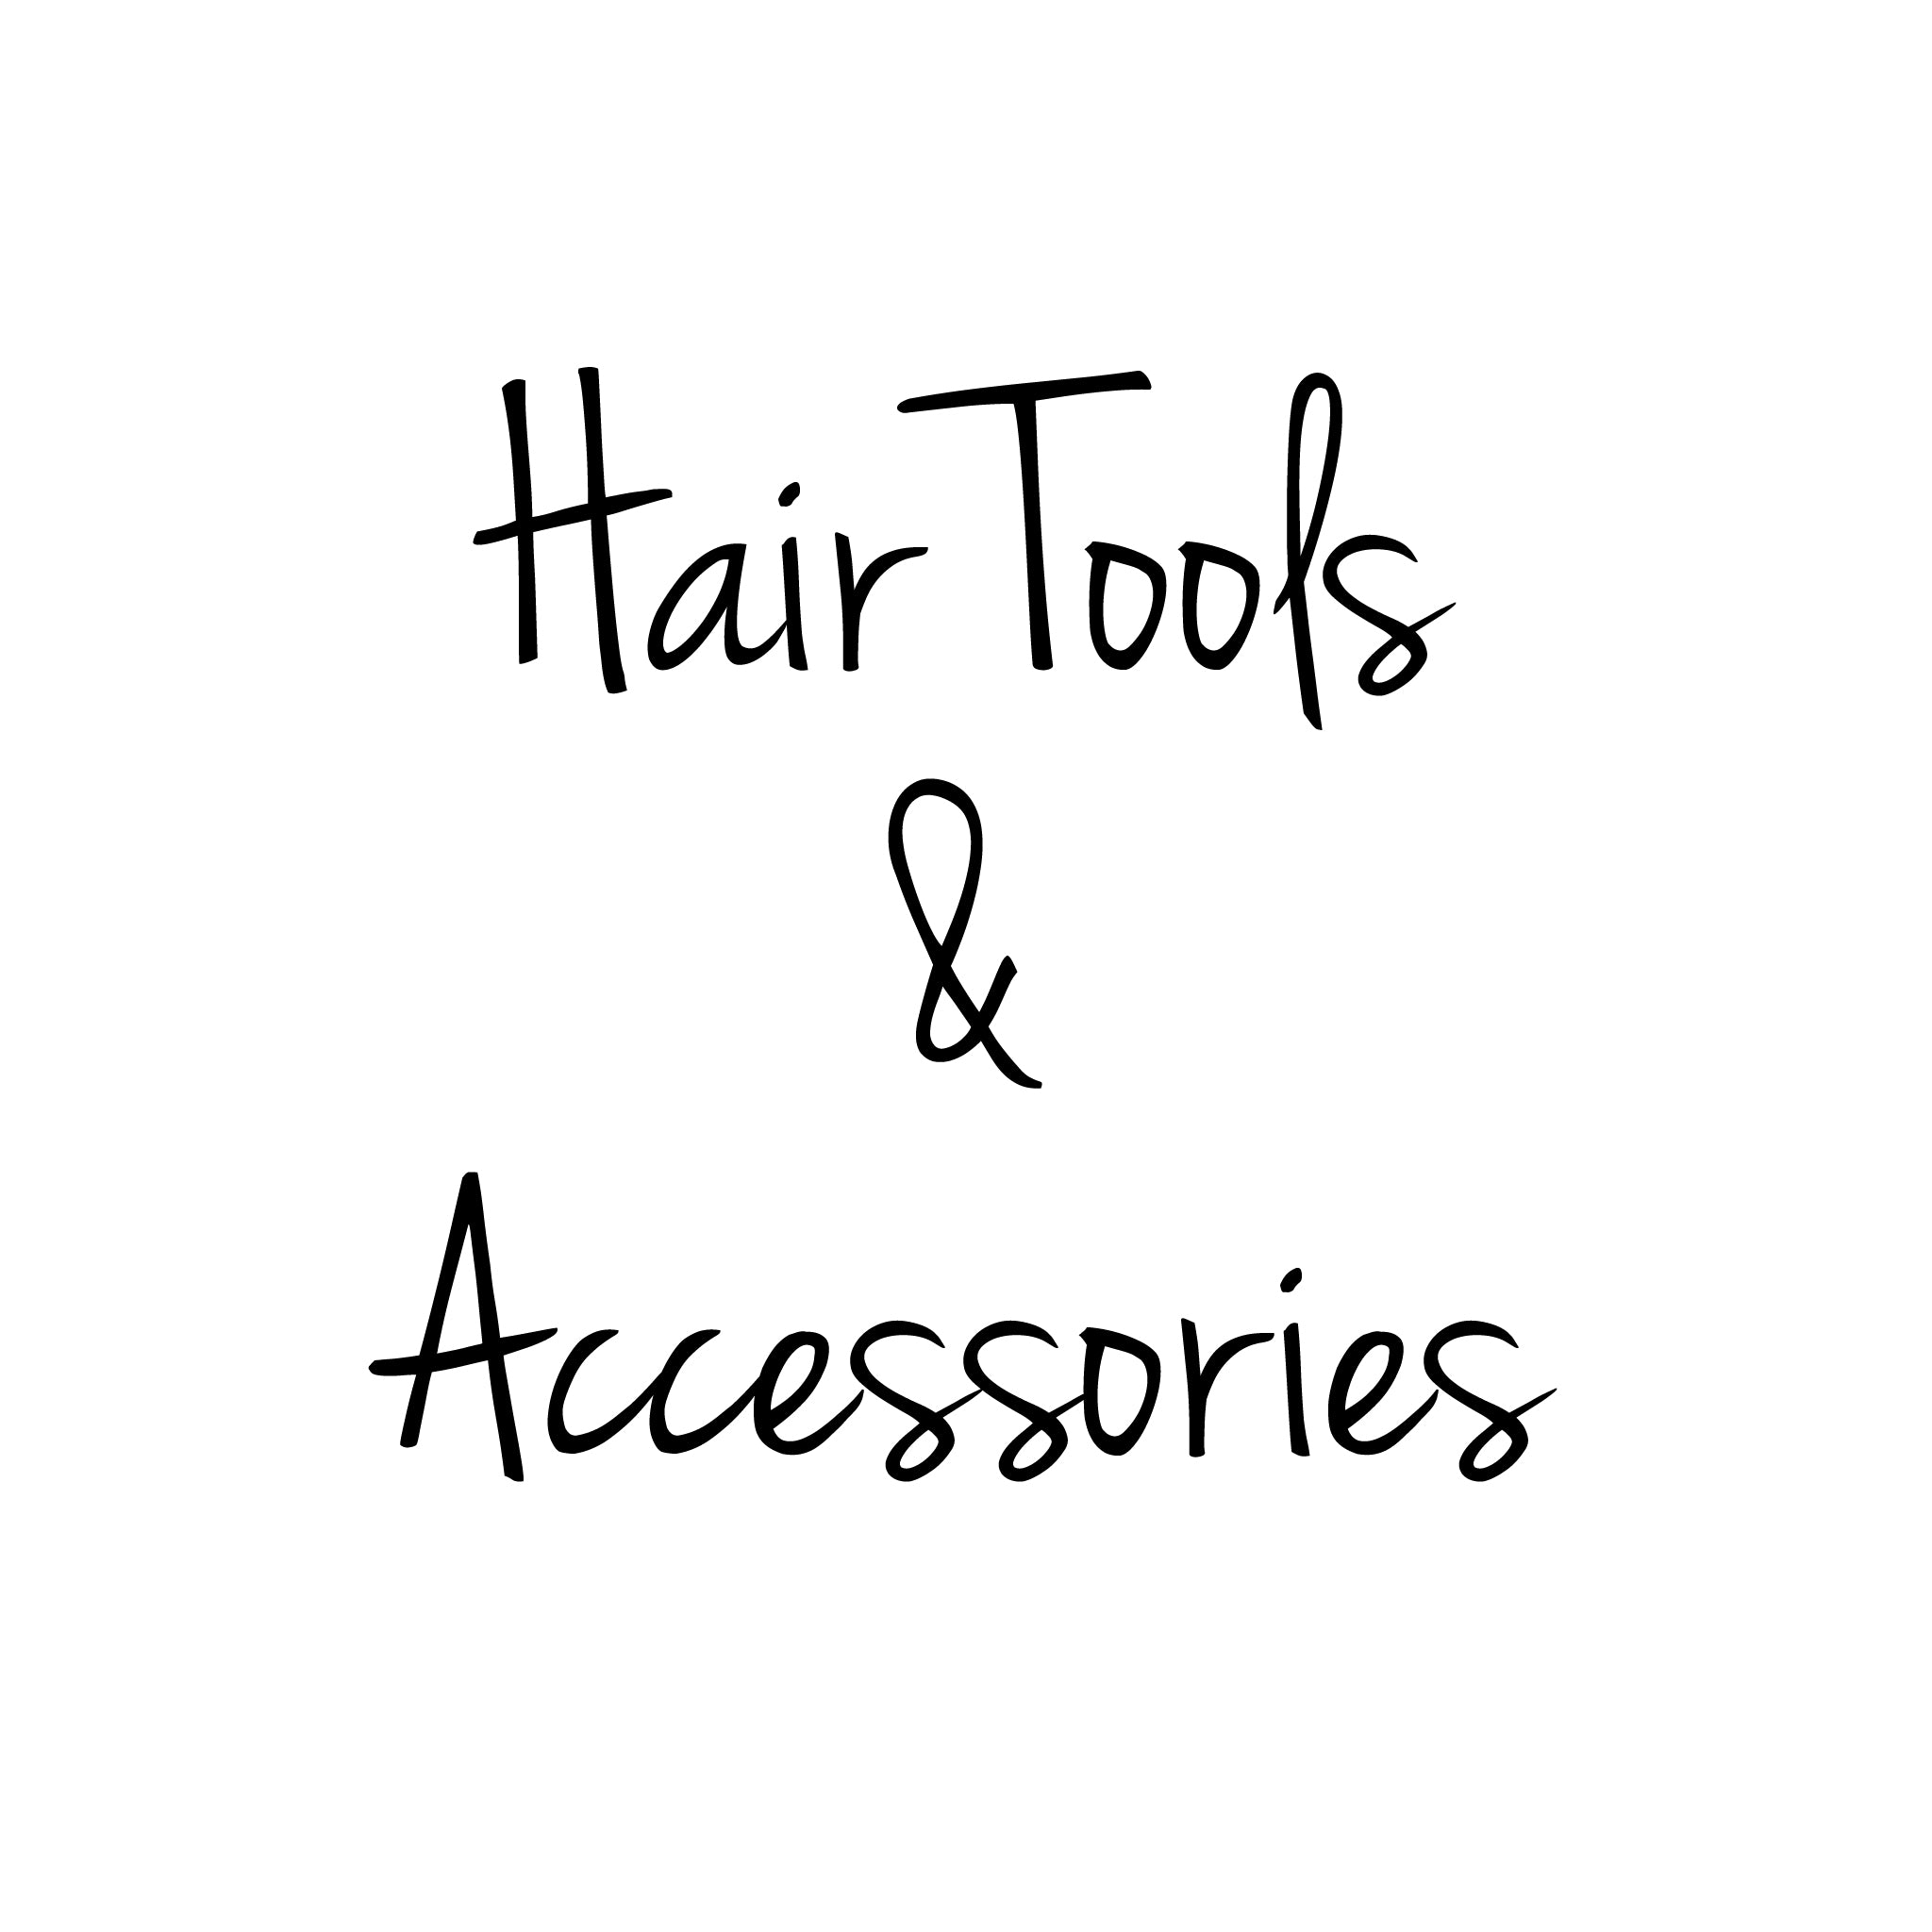 HAIR TOOLS & ACCESSORIES